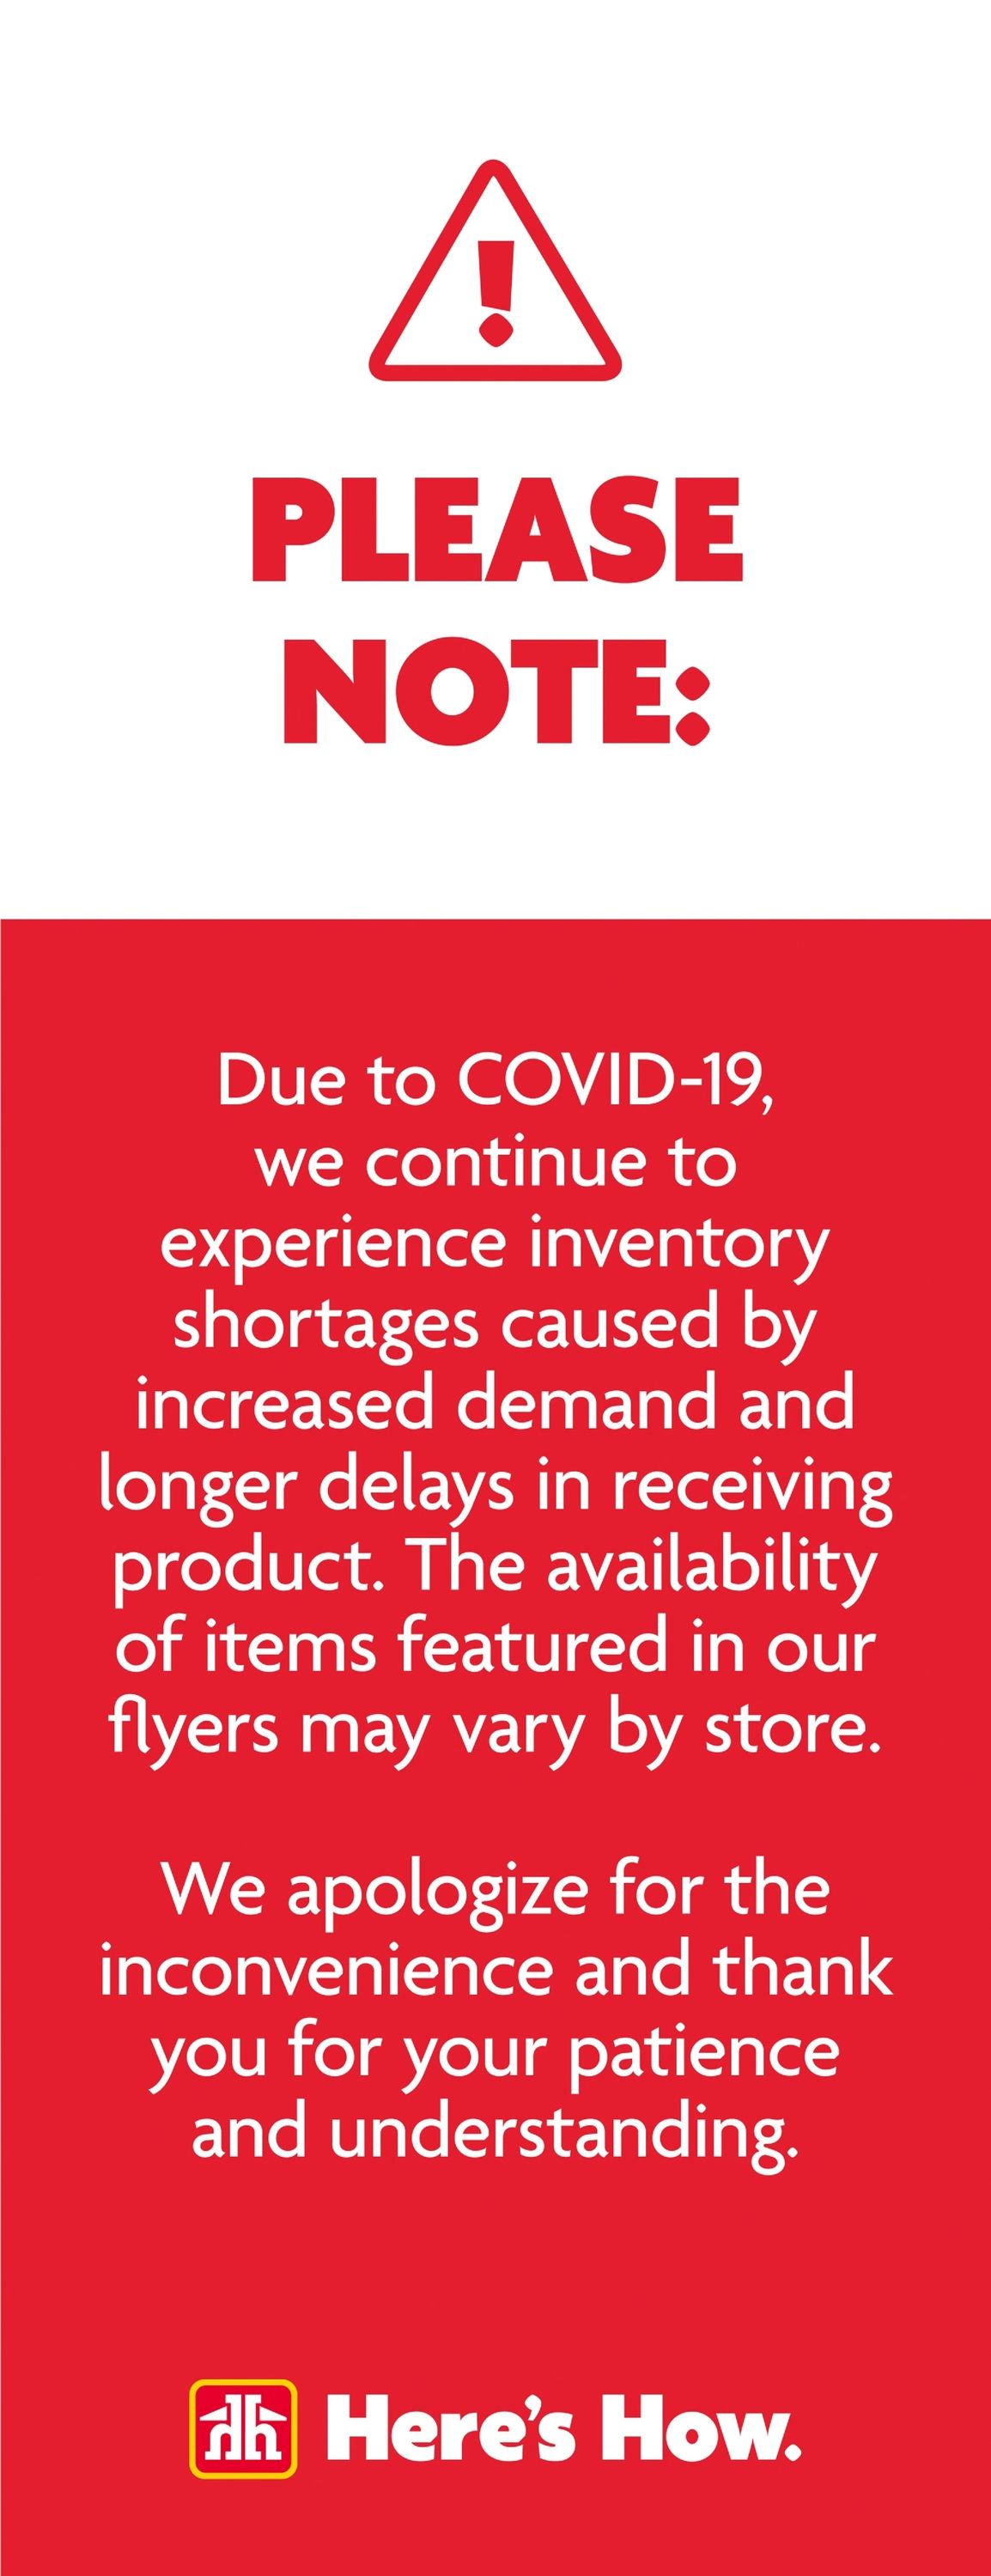 Home Hardware Flyer from 07/21/2022